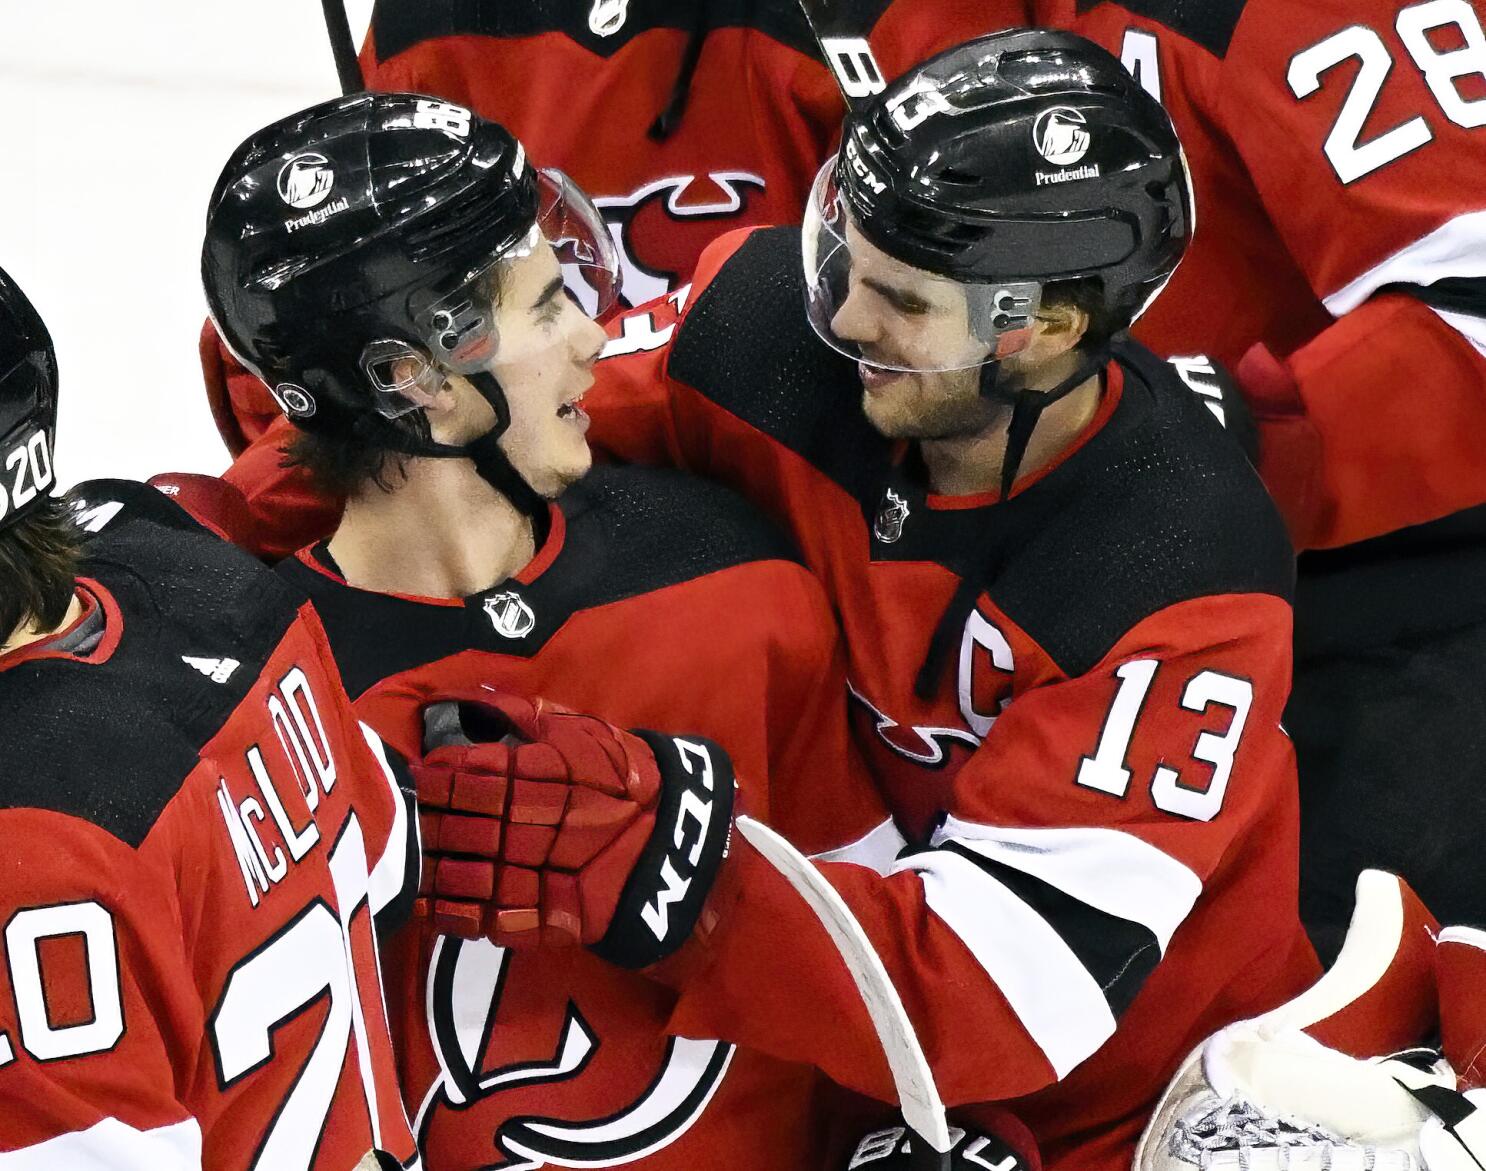 Power outage at Prudential Center cancels Devils vs. Islanders preseason  game 